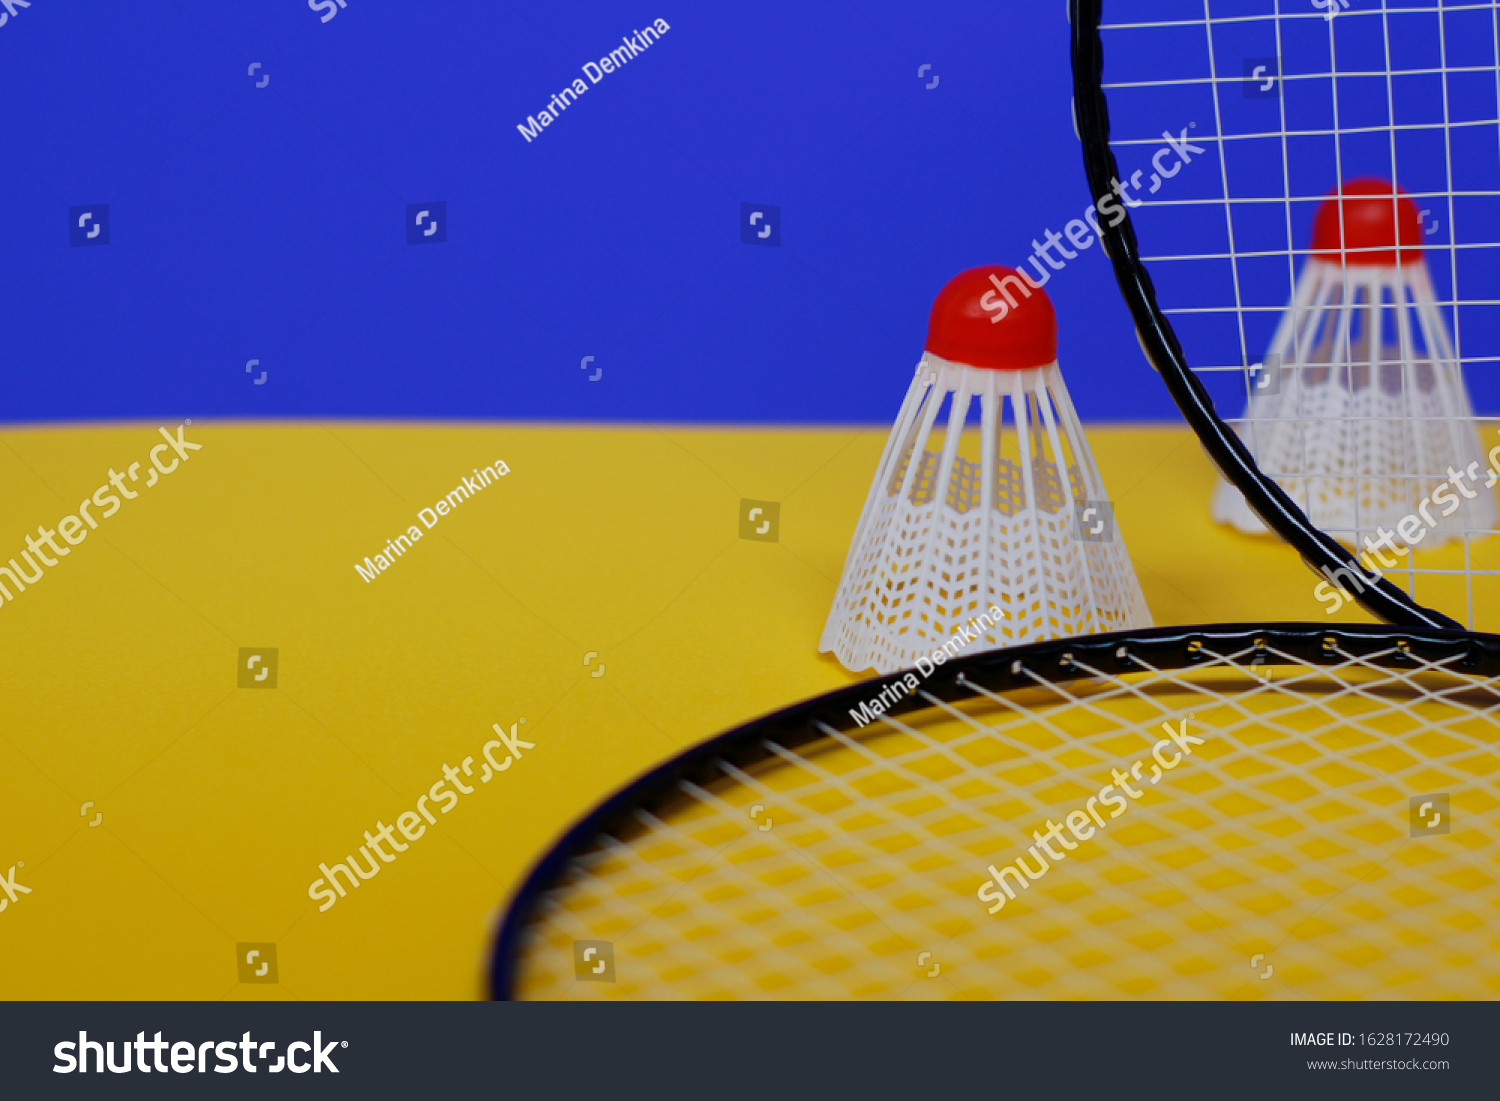 Badminton. Two shuttlecocks and two badminton racket. The colored background is blue and yellow. Idea for a magazine. #1628172490